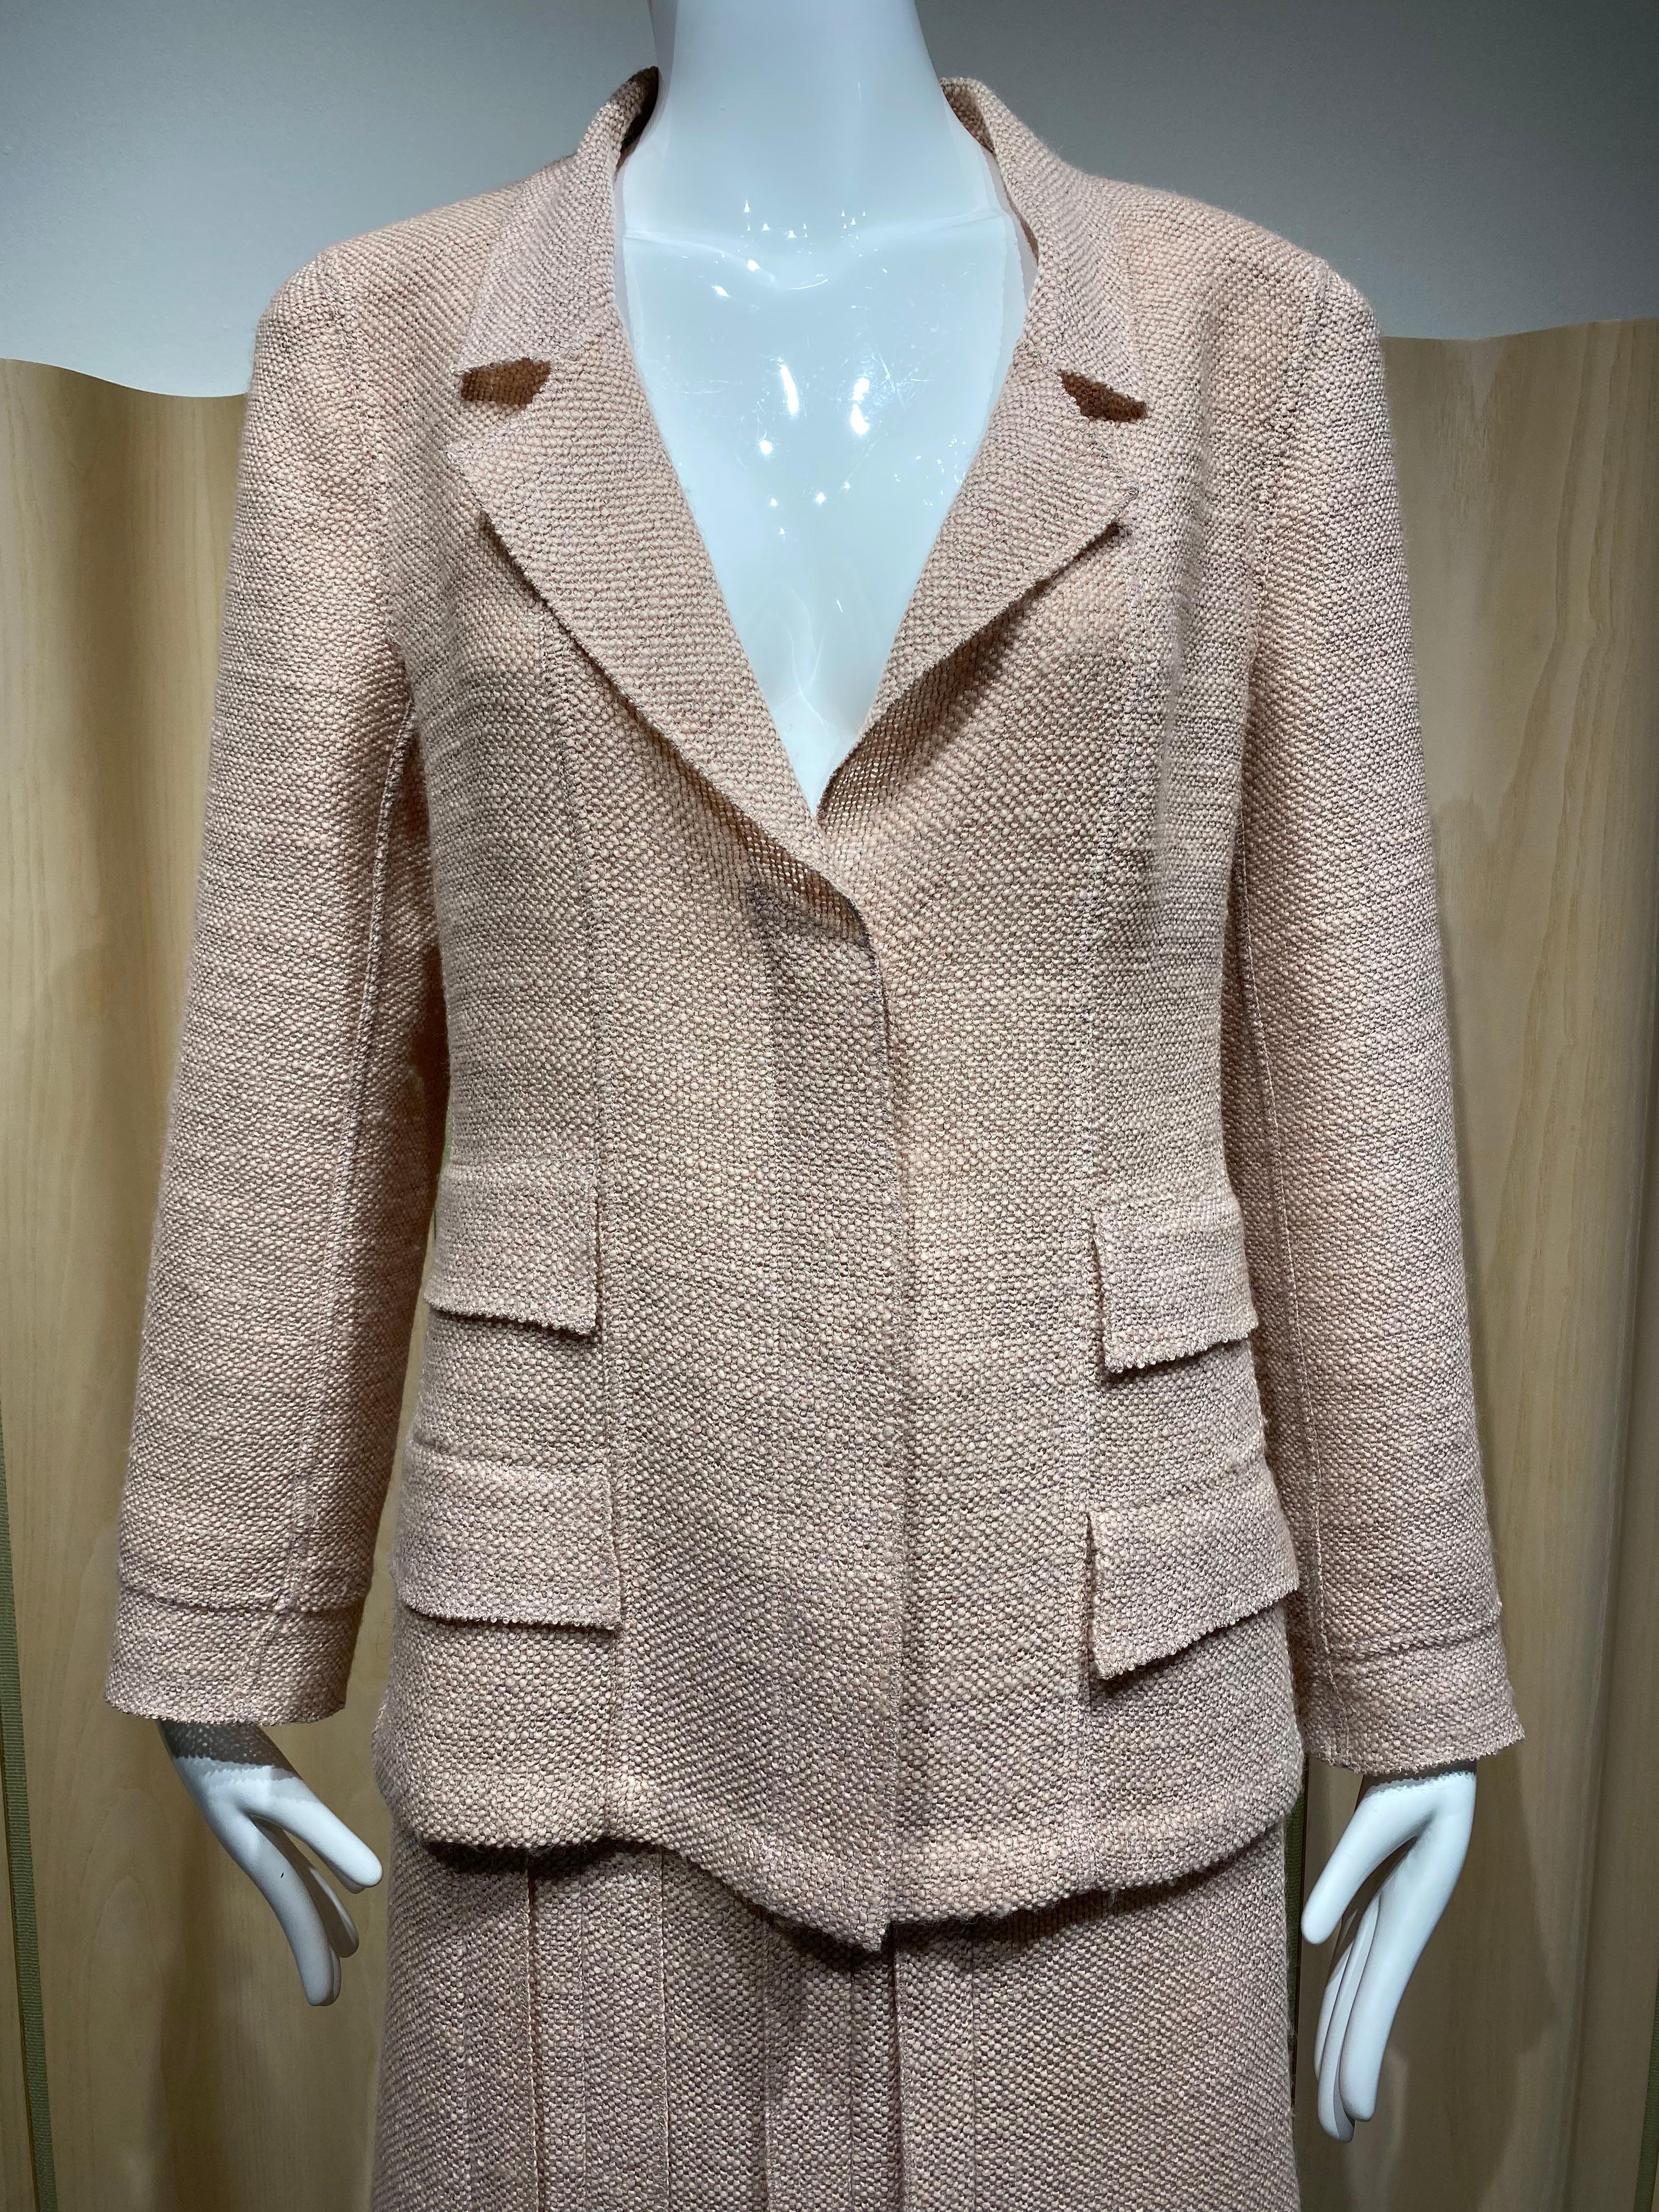 Vintage 90s Chanel blush pink /pale pink light wool suits lined in silk.
Blazer has clear acrylic button. Skirt is knee length.
Marked size: 42fr / Medium - Large 
Measurement for Blazer/ Jacket: 
BustL 39” / Waist: 36”/ Hip: 42” / Sleeve length: